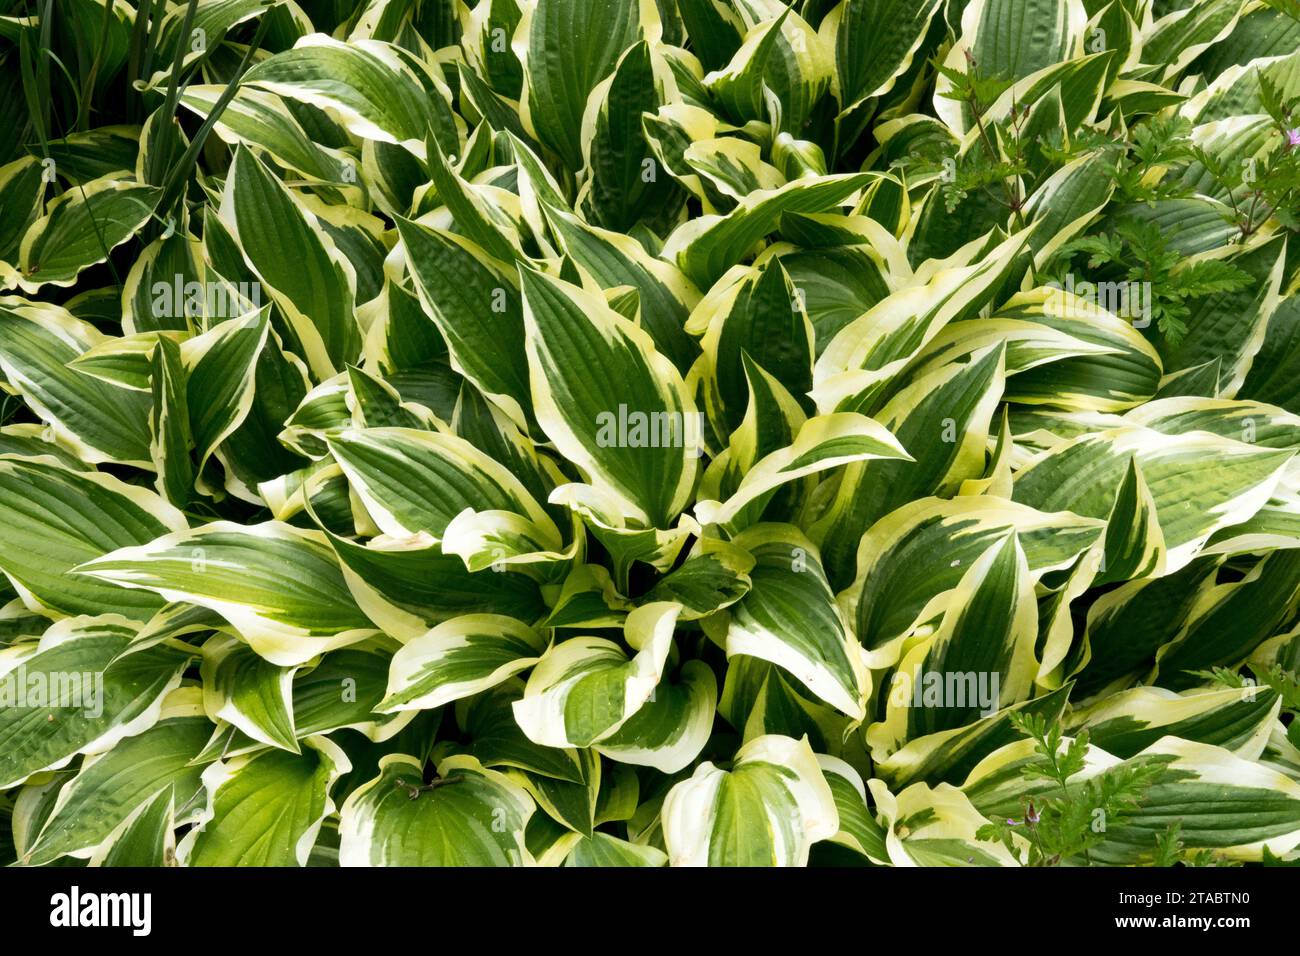 Leaves of Perennial, Hostas, Hardy, Plantain Lily, Spring, Foliage, Variegated, Leaf, Hosta 'Bold Ribbons' green leaves with white edging Stock Photo